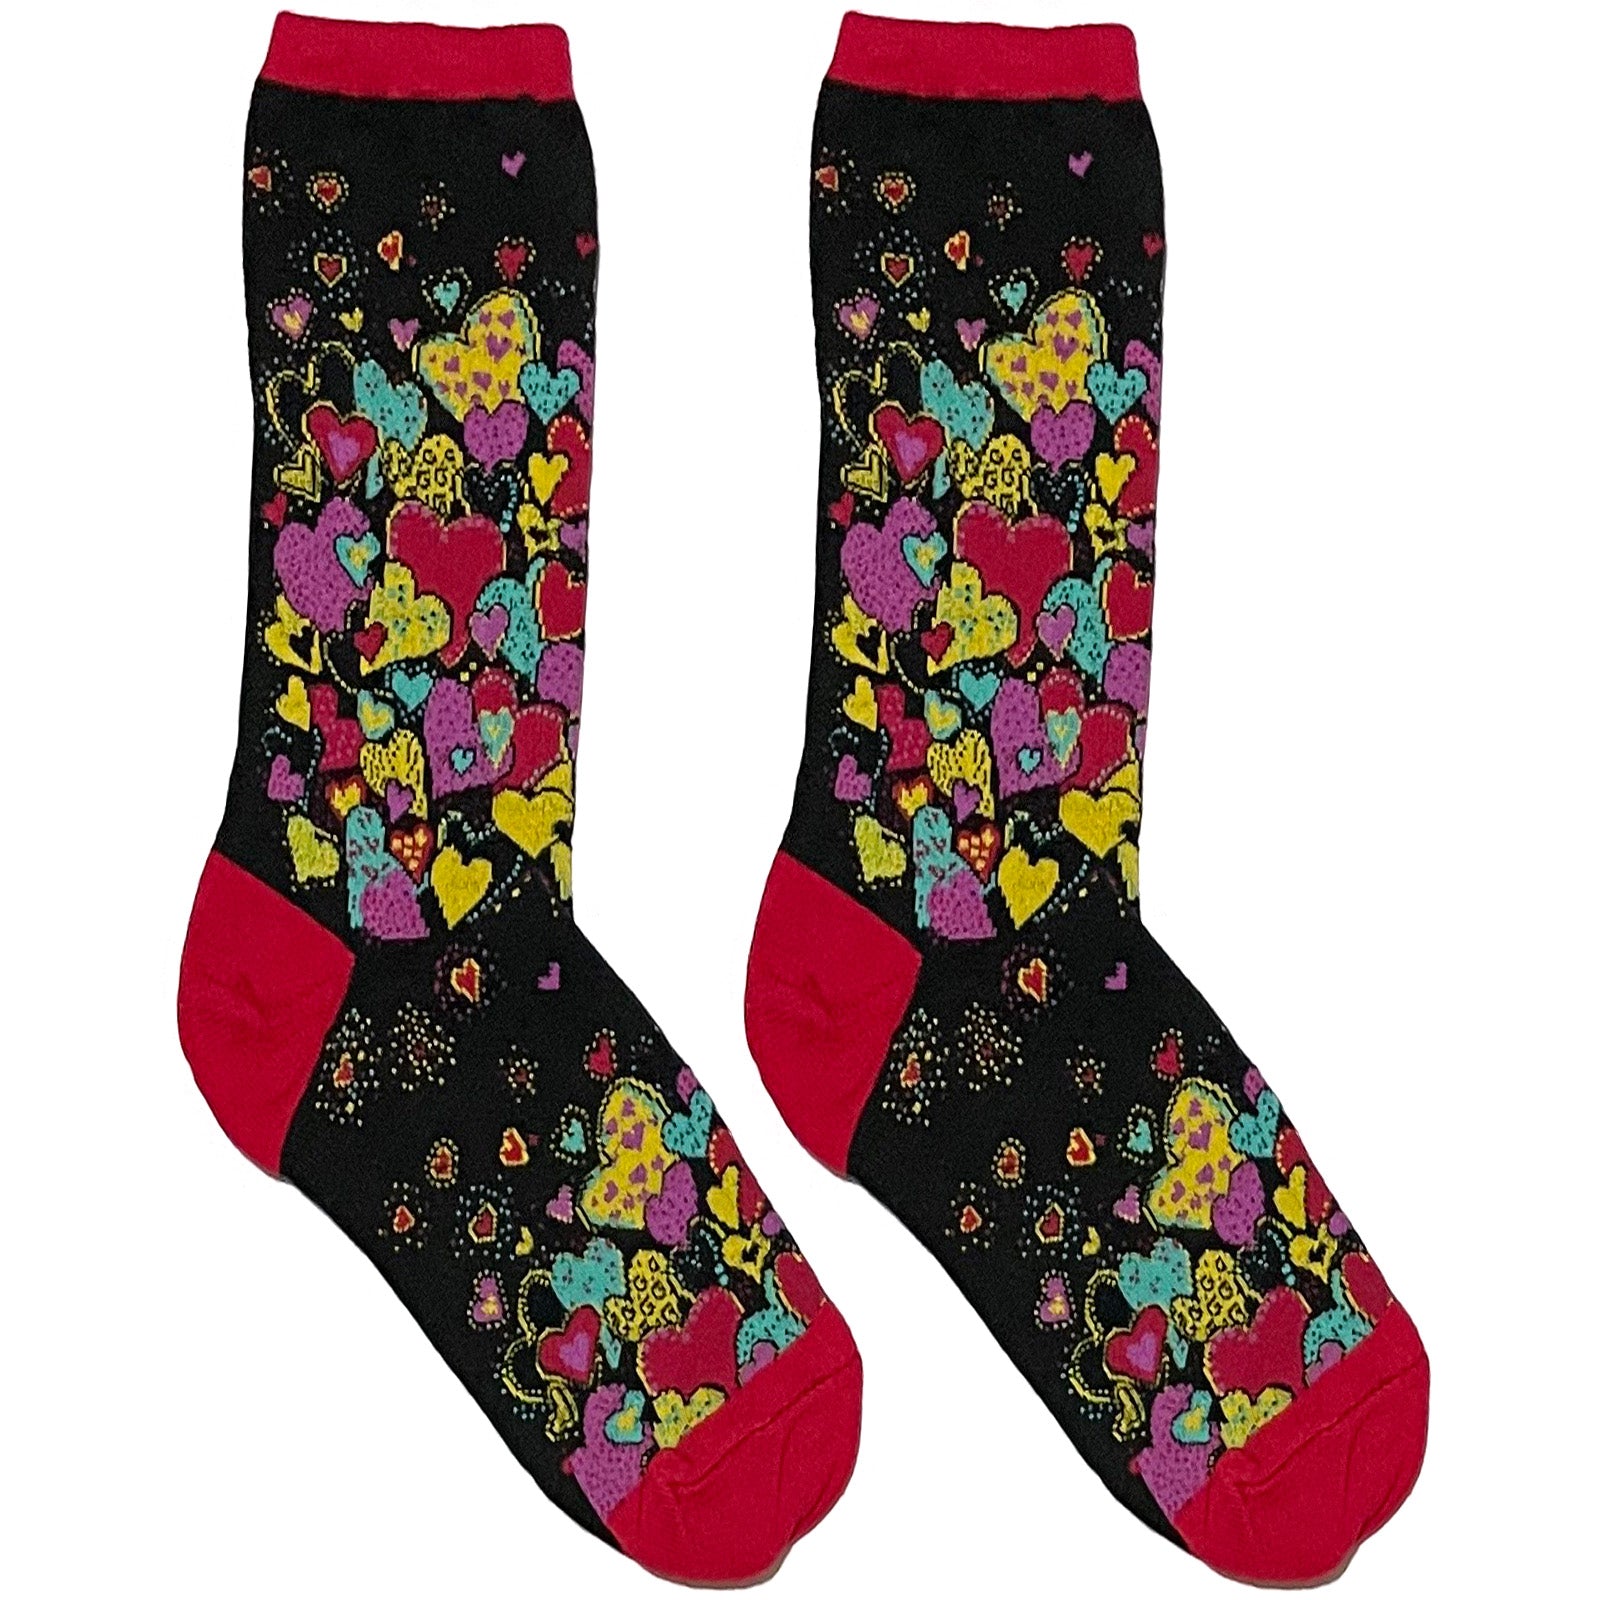 Black And Red Hearts Short Crew Socks